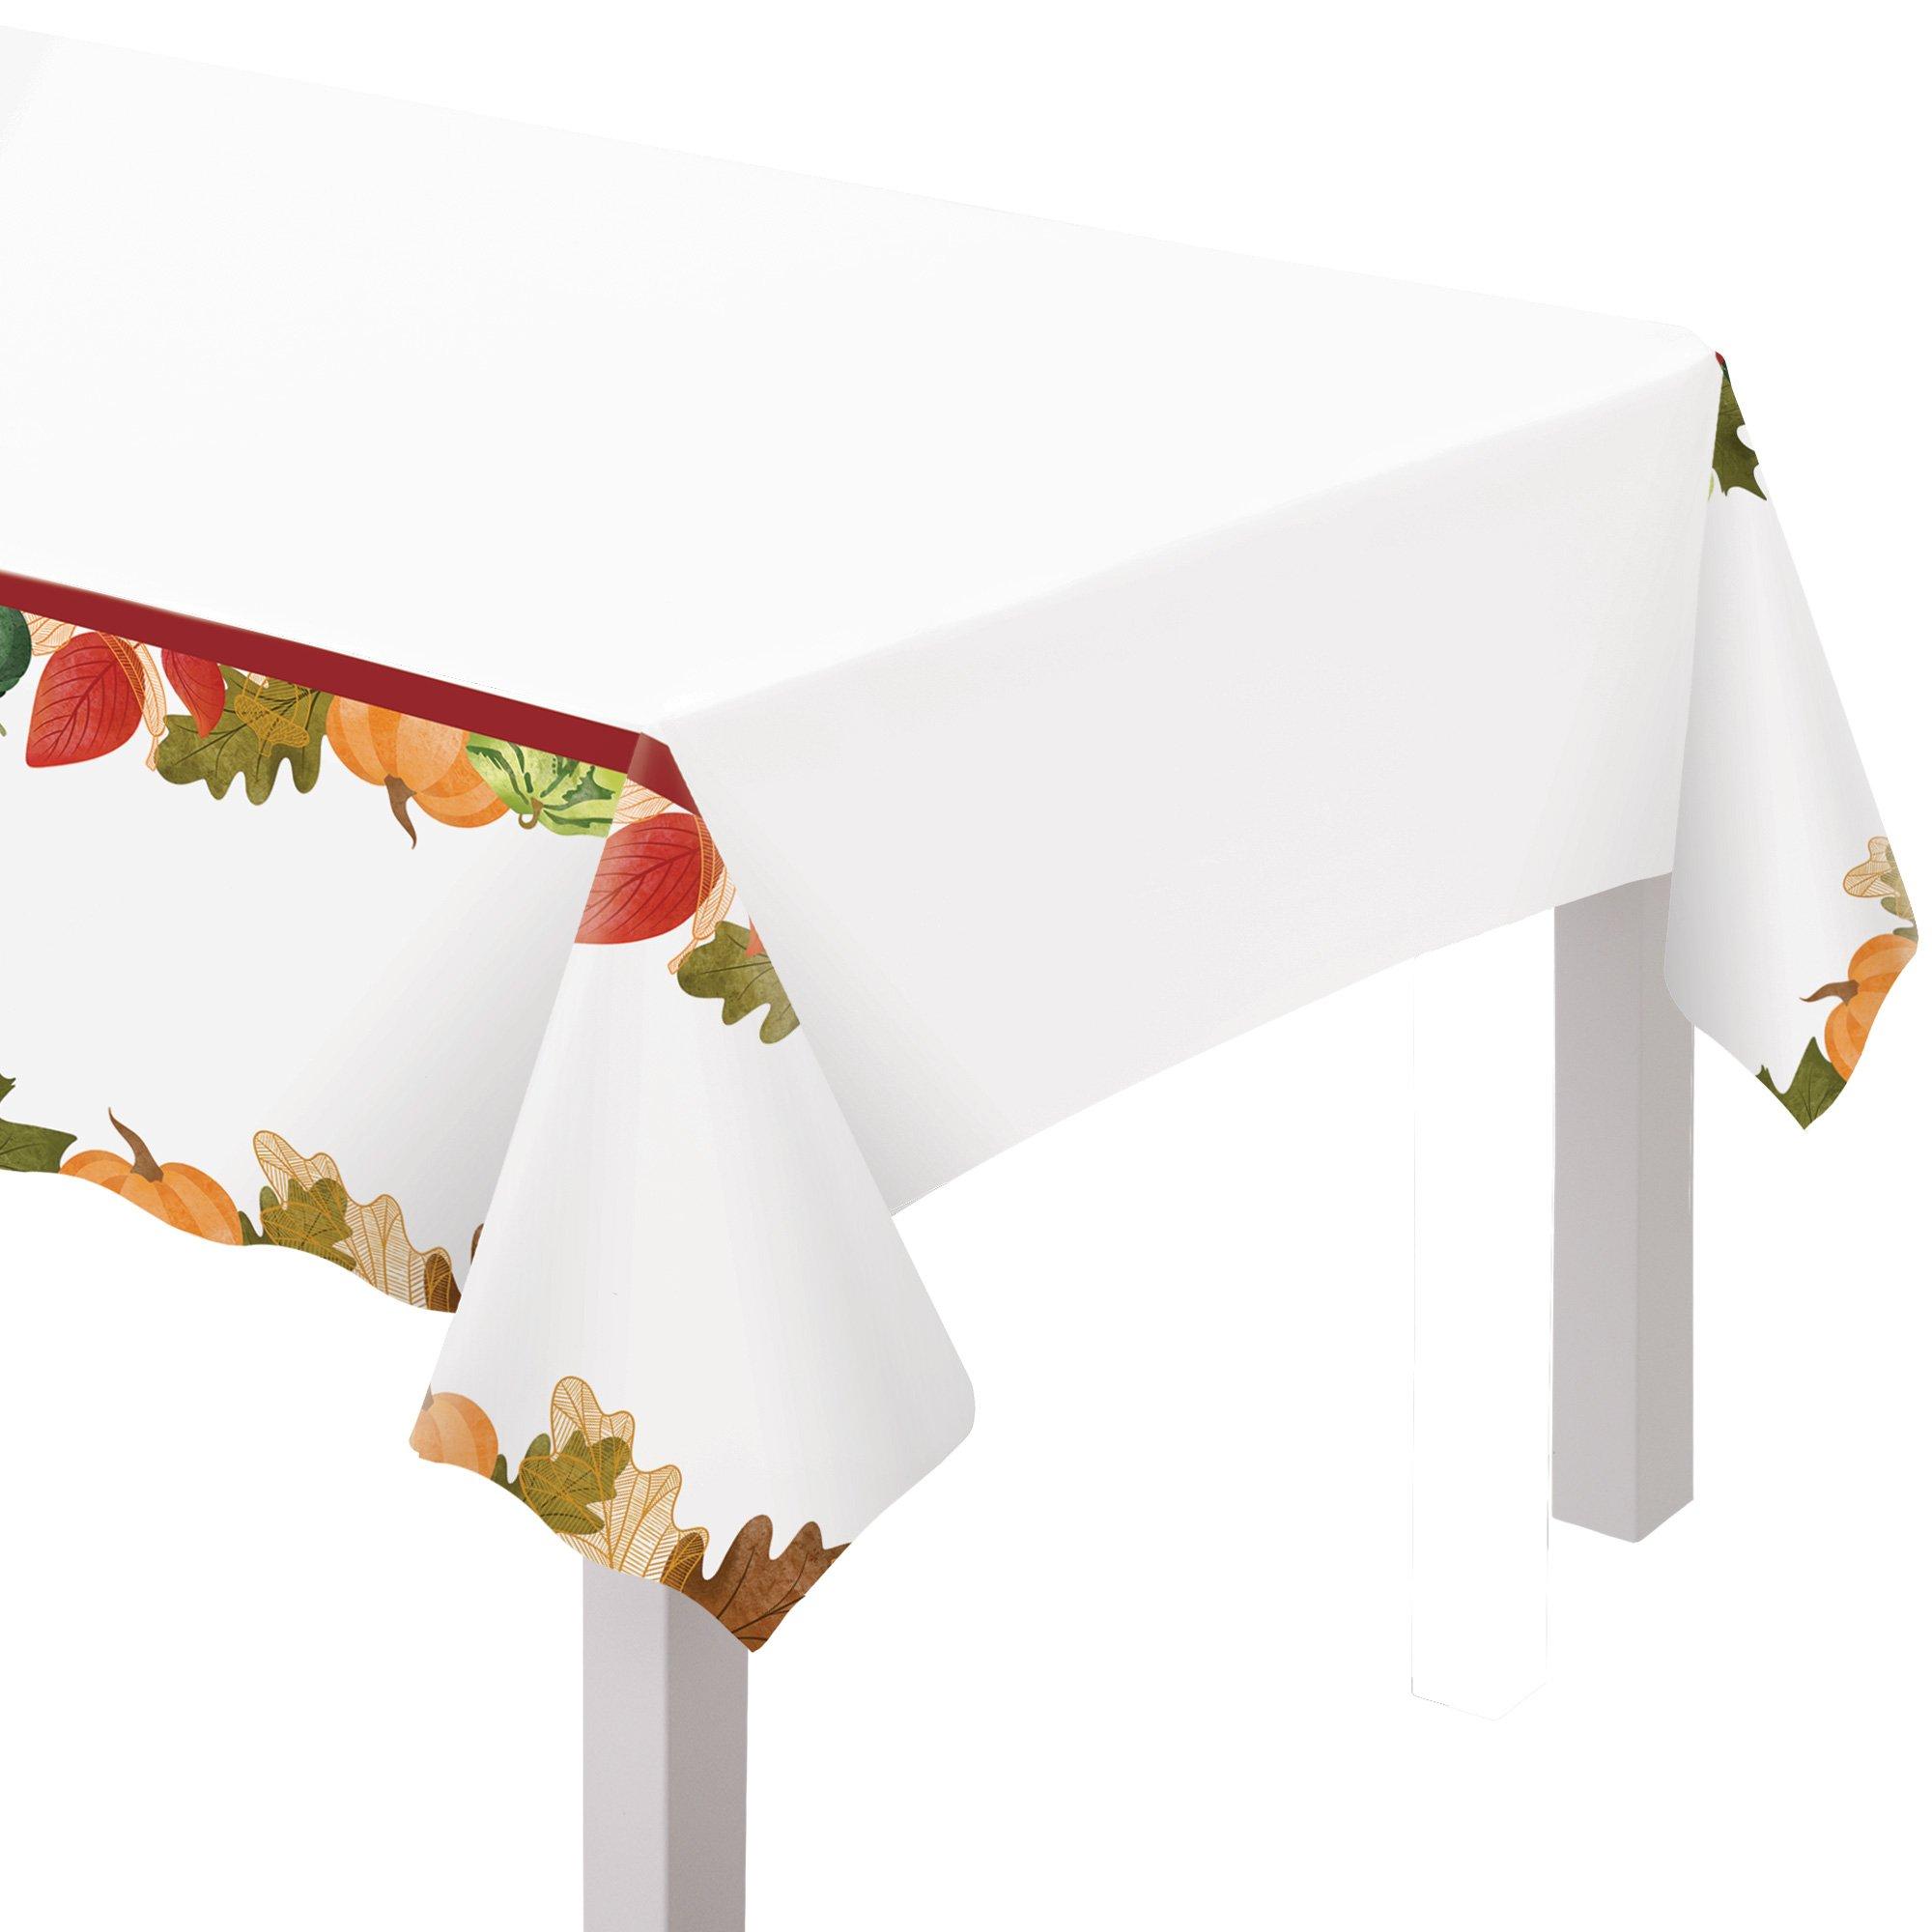 Changing Seasons Thanksgiving Plastic Table Cover, 54in x 102in